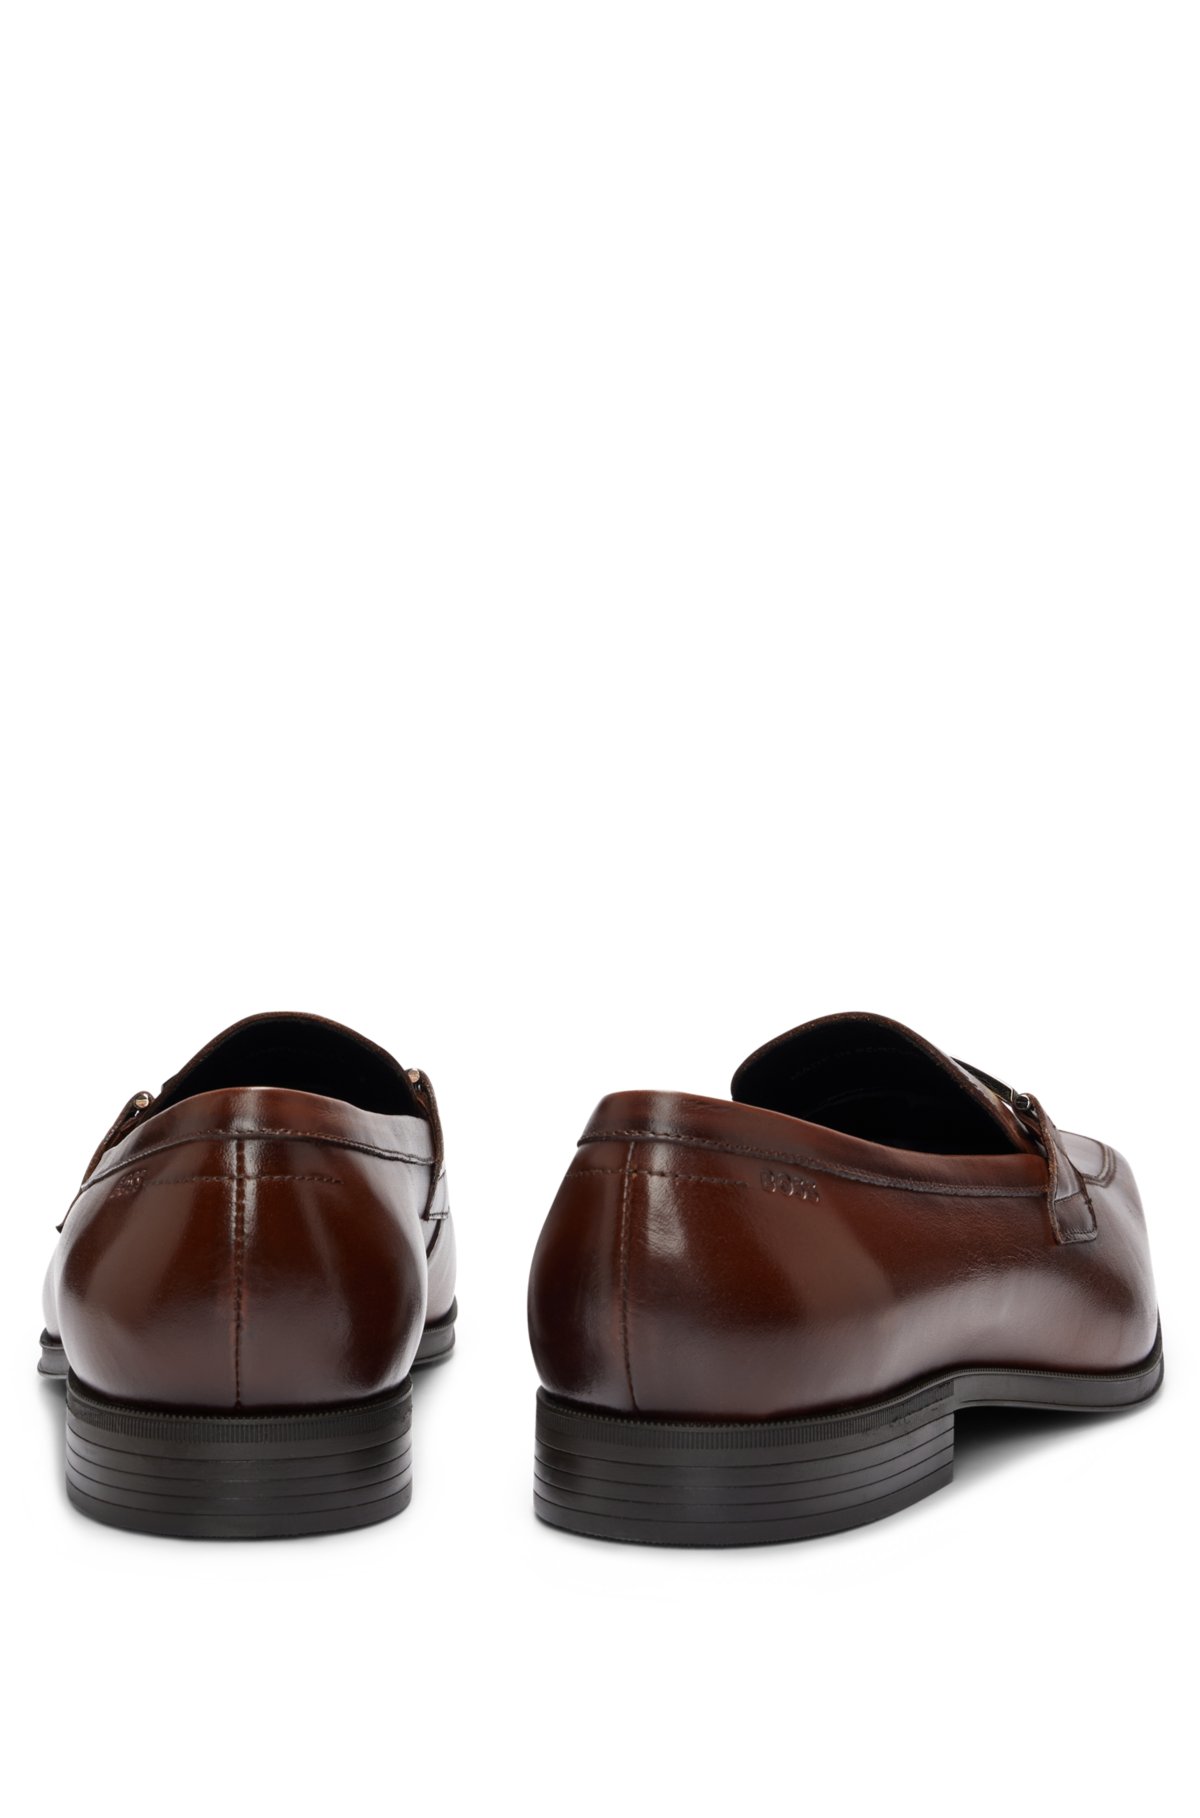 Leather slip-on loafers with branded hardware, Brown